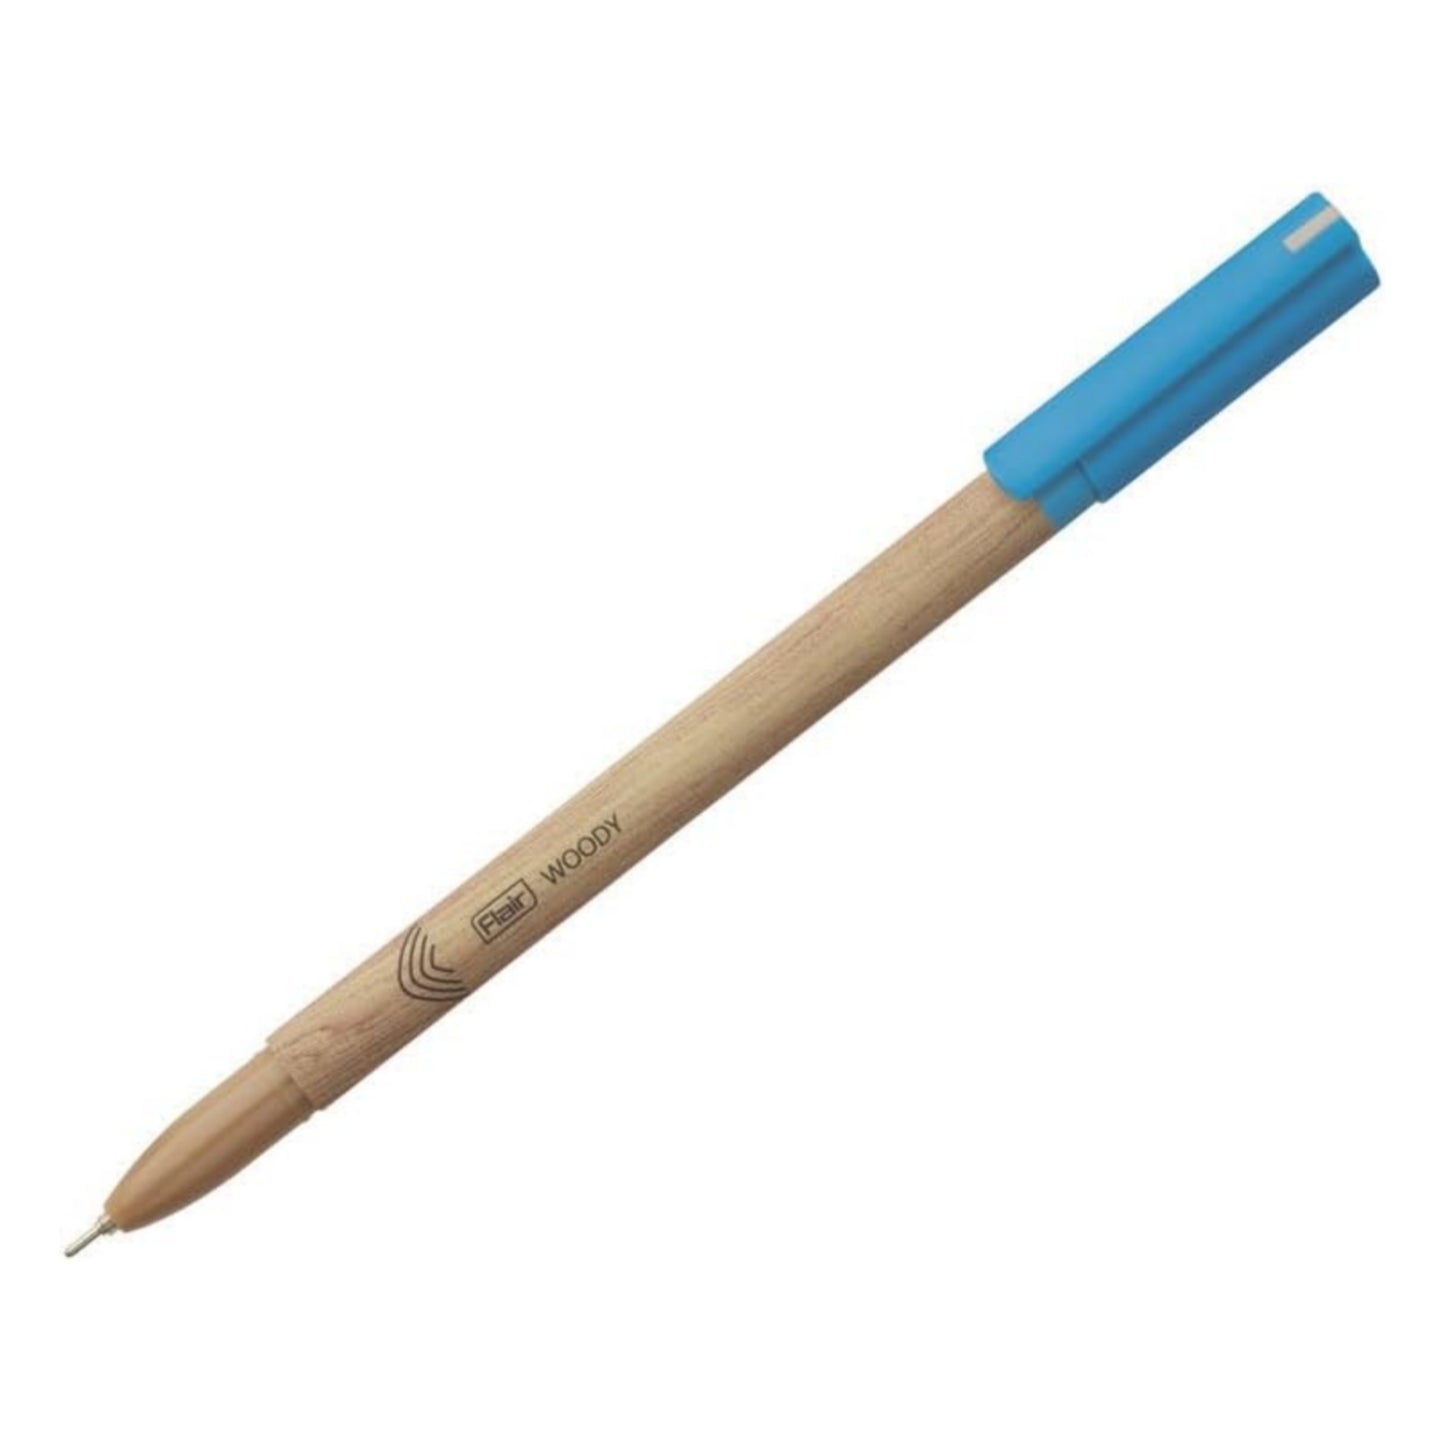 Flair Woody 0.7mm Ball Pen | Attractive Woody Design | Smooth Ink Flow System With Low-Viscosity Ink | Smudge Free Writing | Blue Ink - Pack of 10 Pens